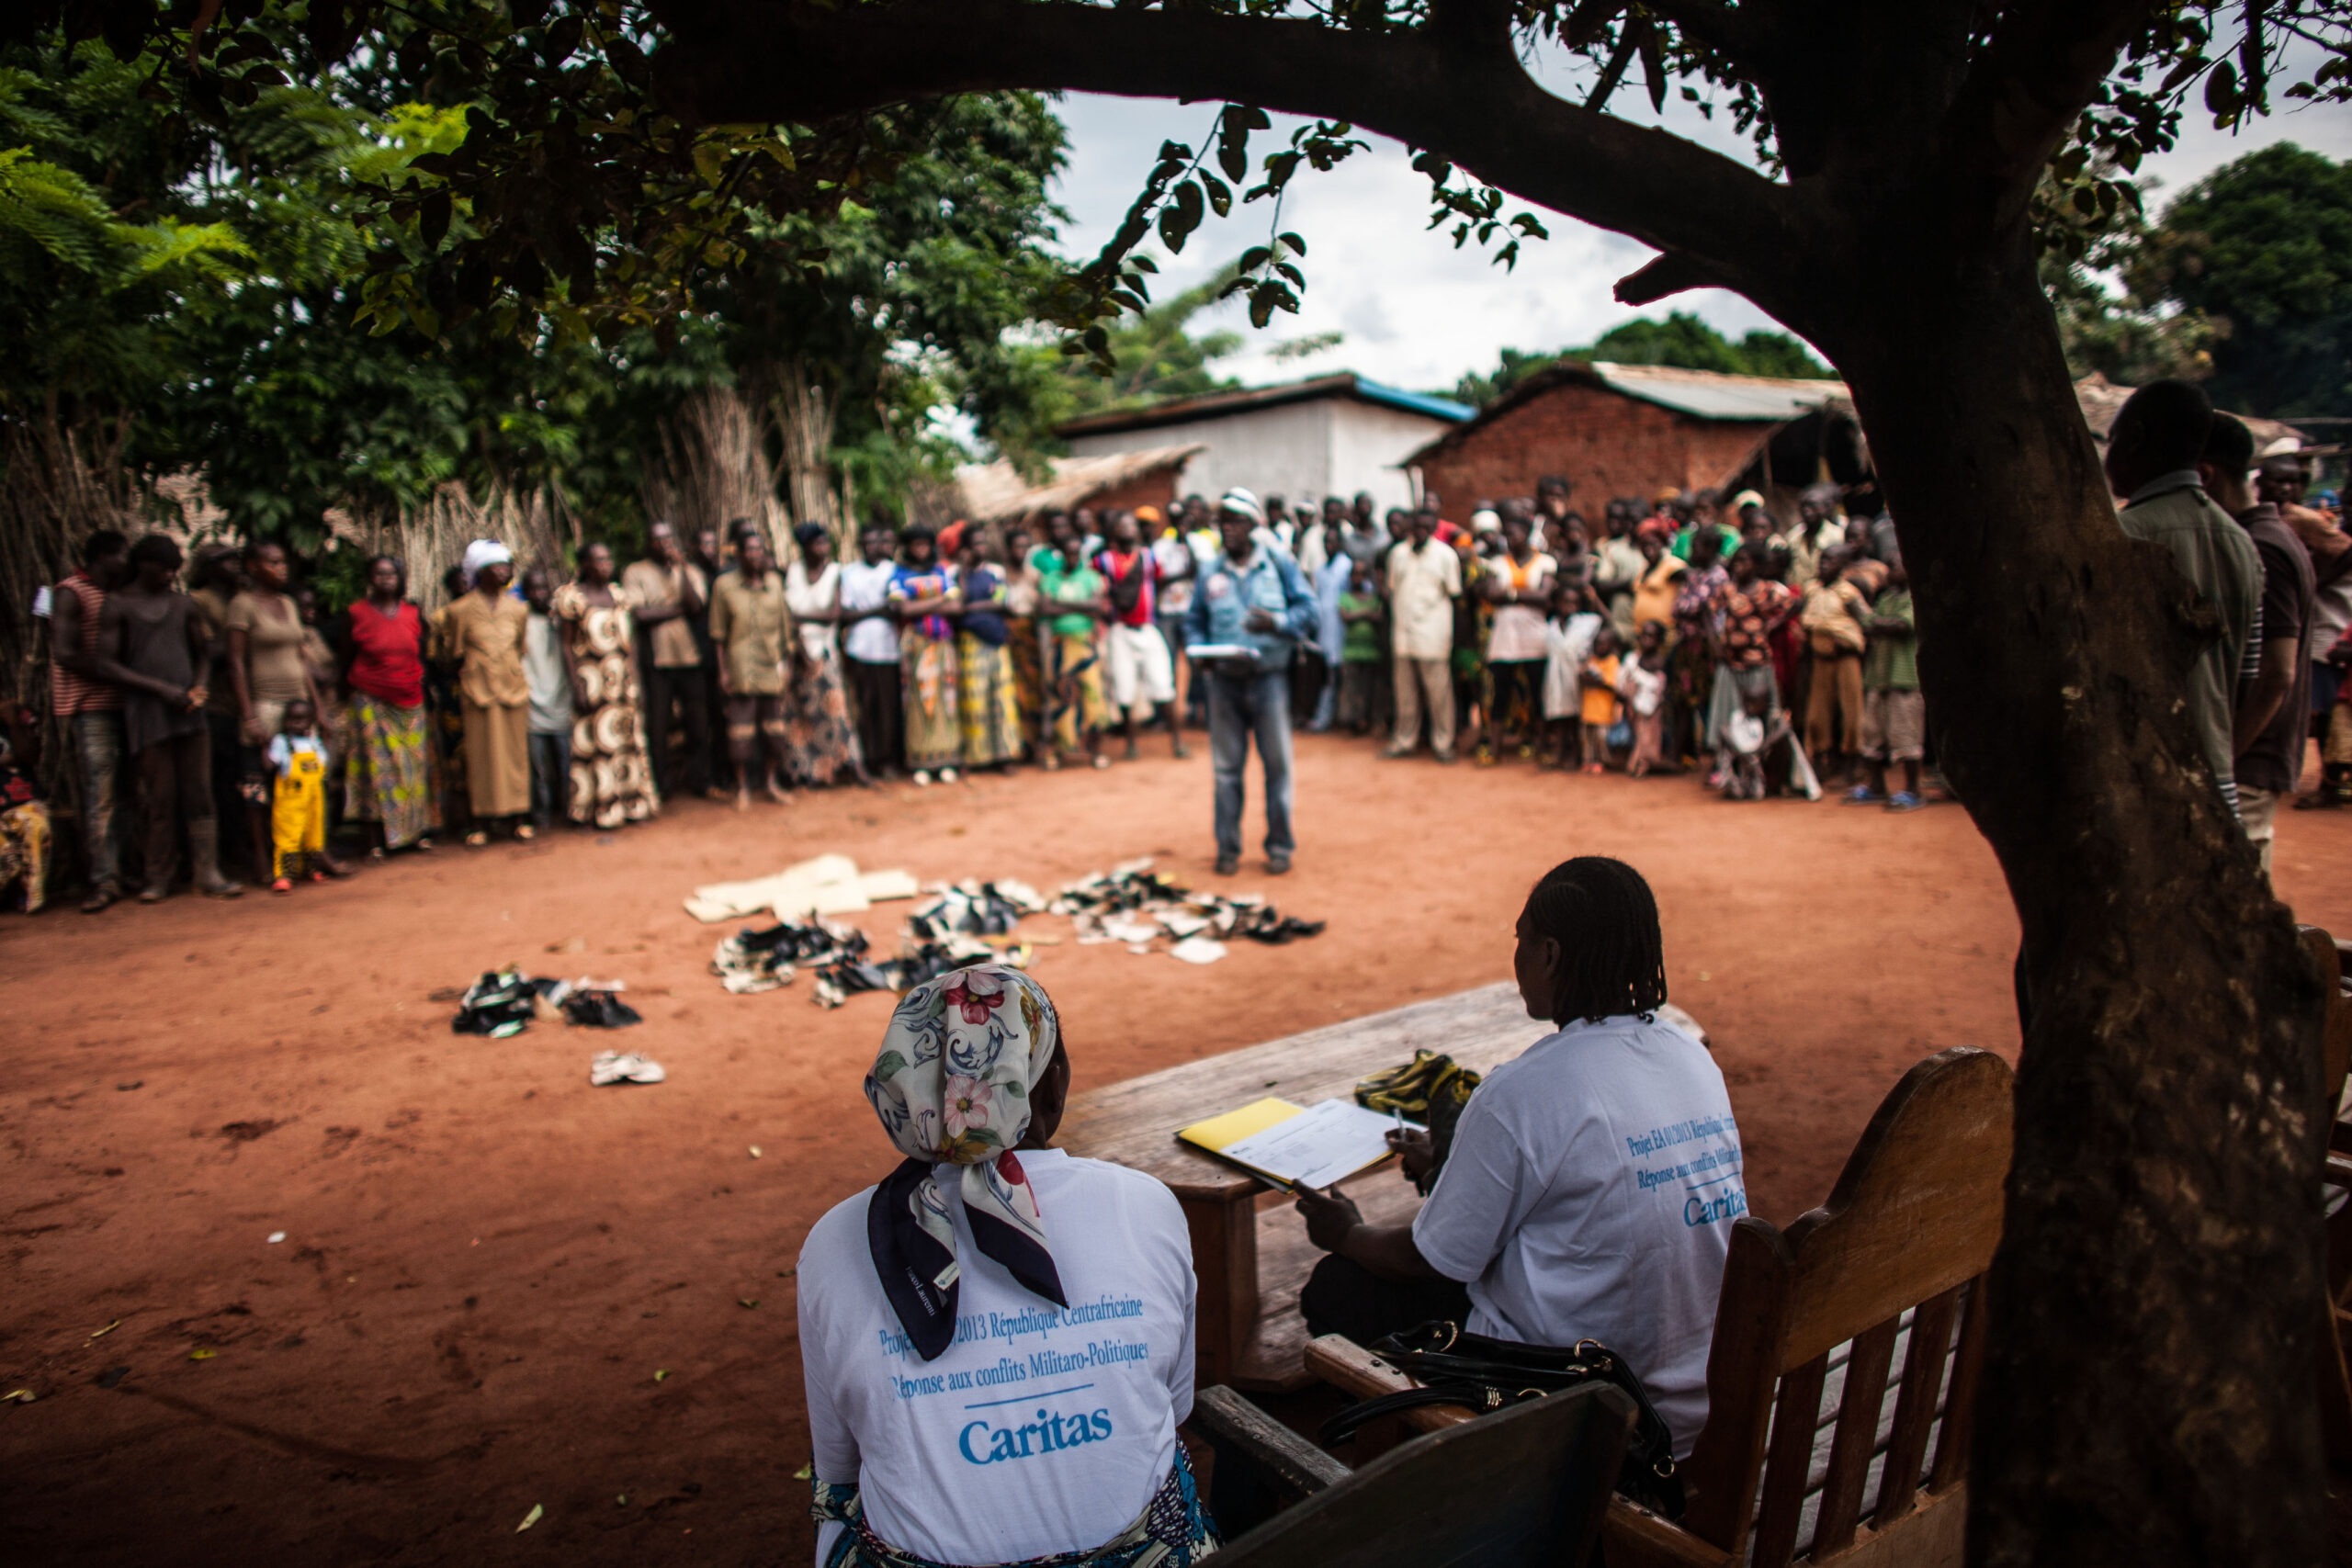 Caritas committed to support victims of war in Central Africa amidst latest violence in the country